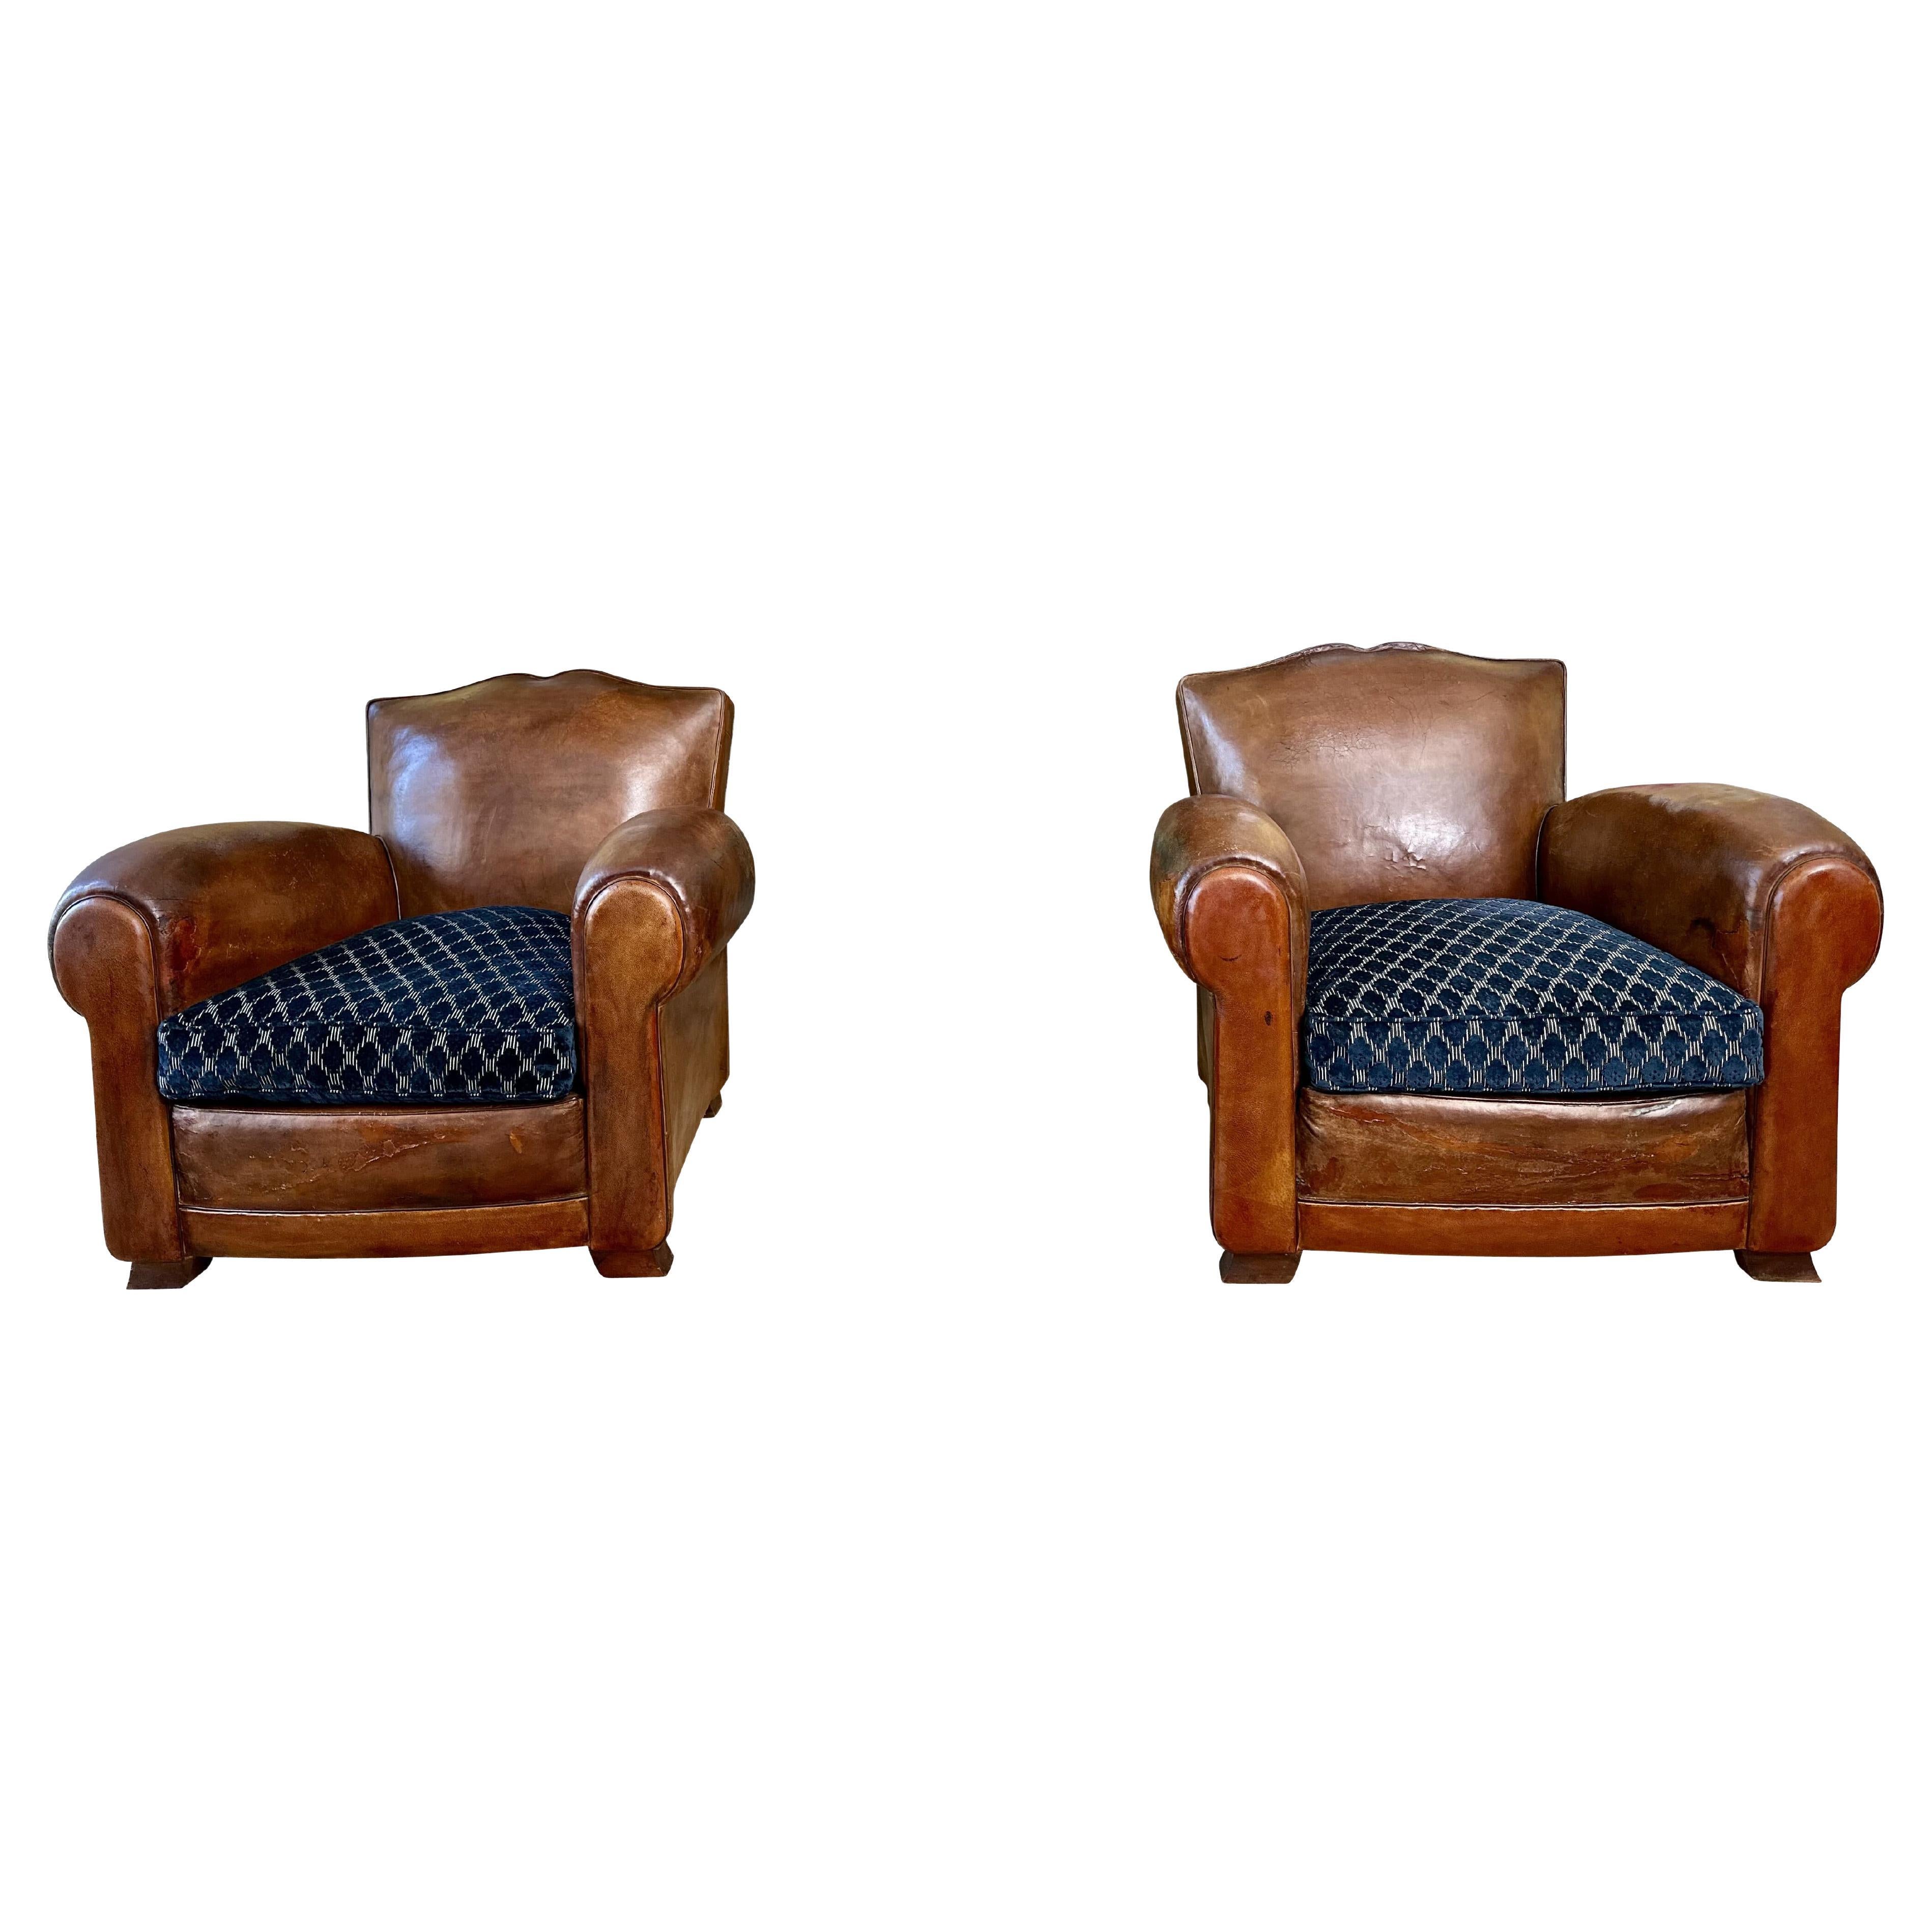 1930 Art Deco French Mustache Back Club Chairs, Christian Lacroix Cushions For Sale